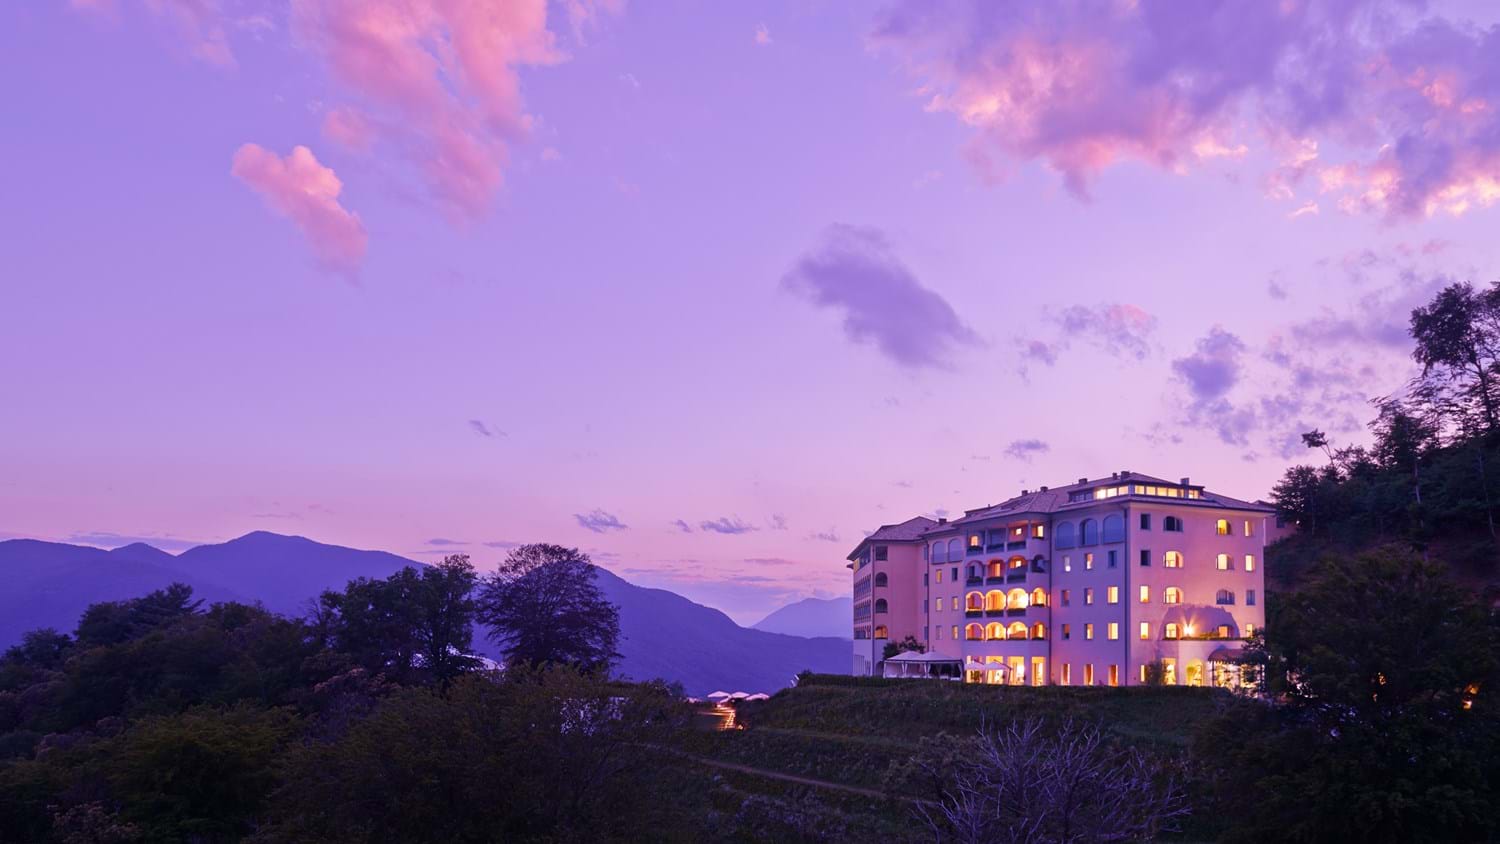 Stay more, save more. The fourth night is given to you by Lugano Region.